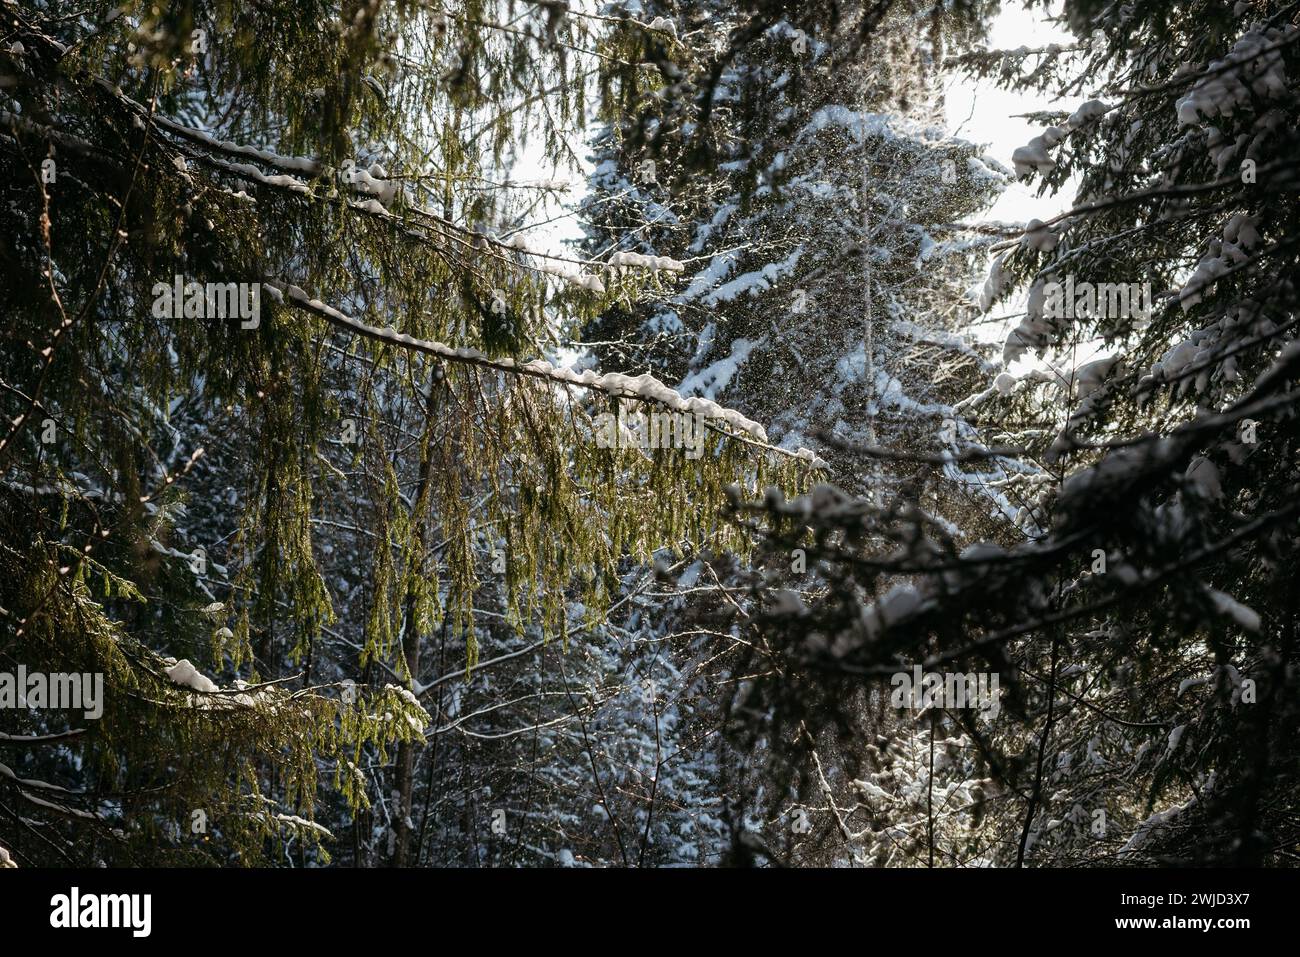 Landscape. Winter forest on a frosty sunny day. The trees are covered with a thick layer of snow. Stock Photo